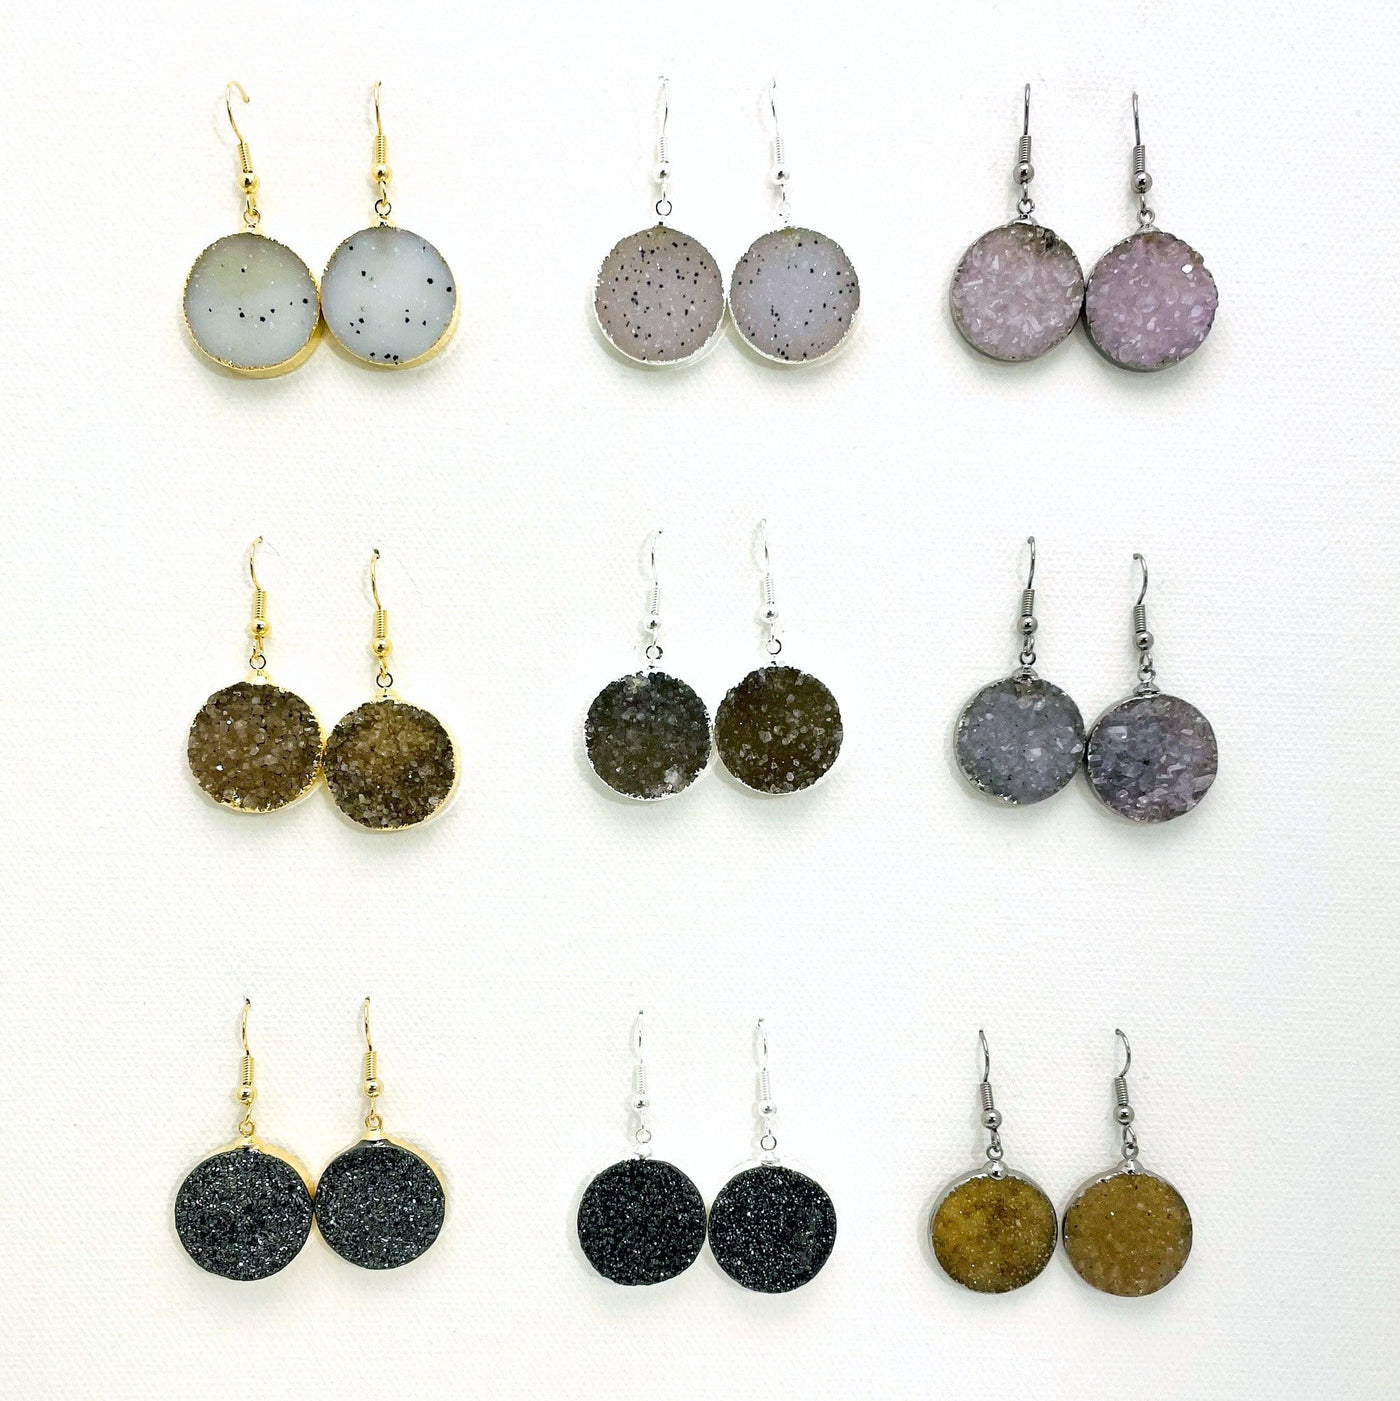 9 assorted round druzy earrings with silver and gold earwires.  Druzy colors range and are white, white with black spots, light purple, various shades of brown and tan, various shades of gray and orange brown.  Two of the earrings on the last row are titanium treated and sparkly black.